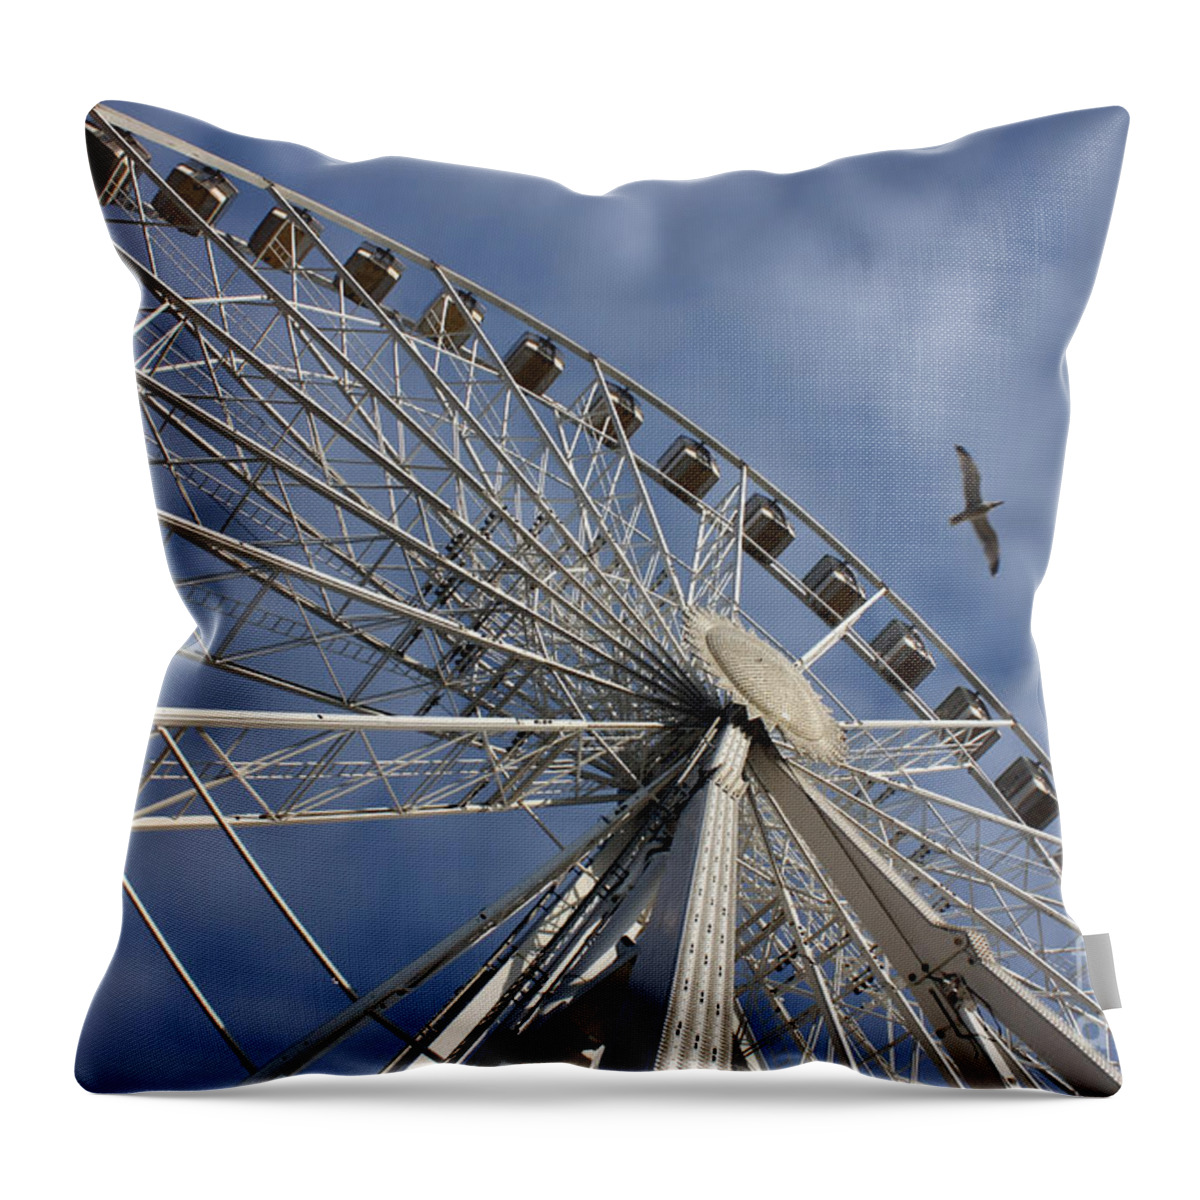 English Riviera Wheel Throw Pillow featuring the photograph English Riviera Wheel Torquay by Terri Waters